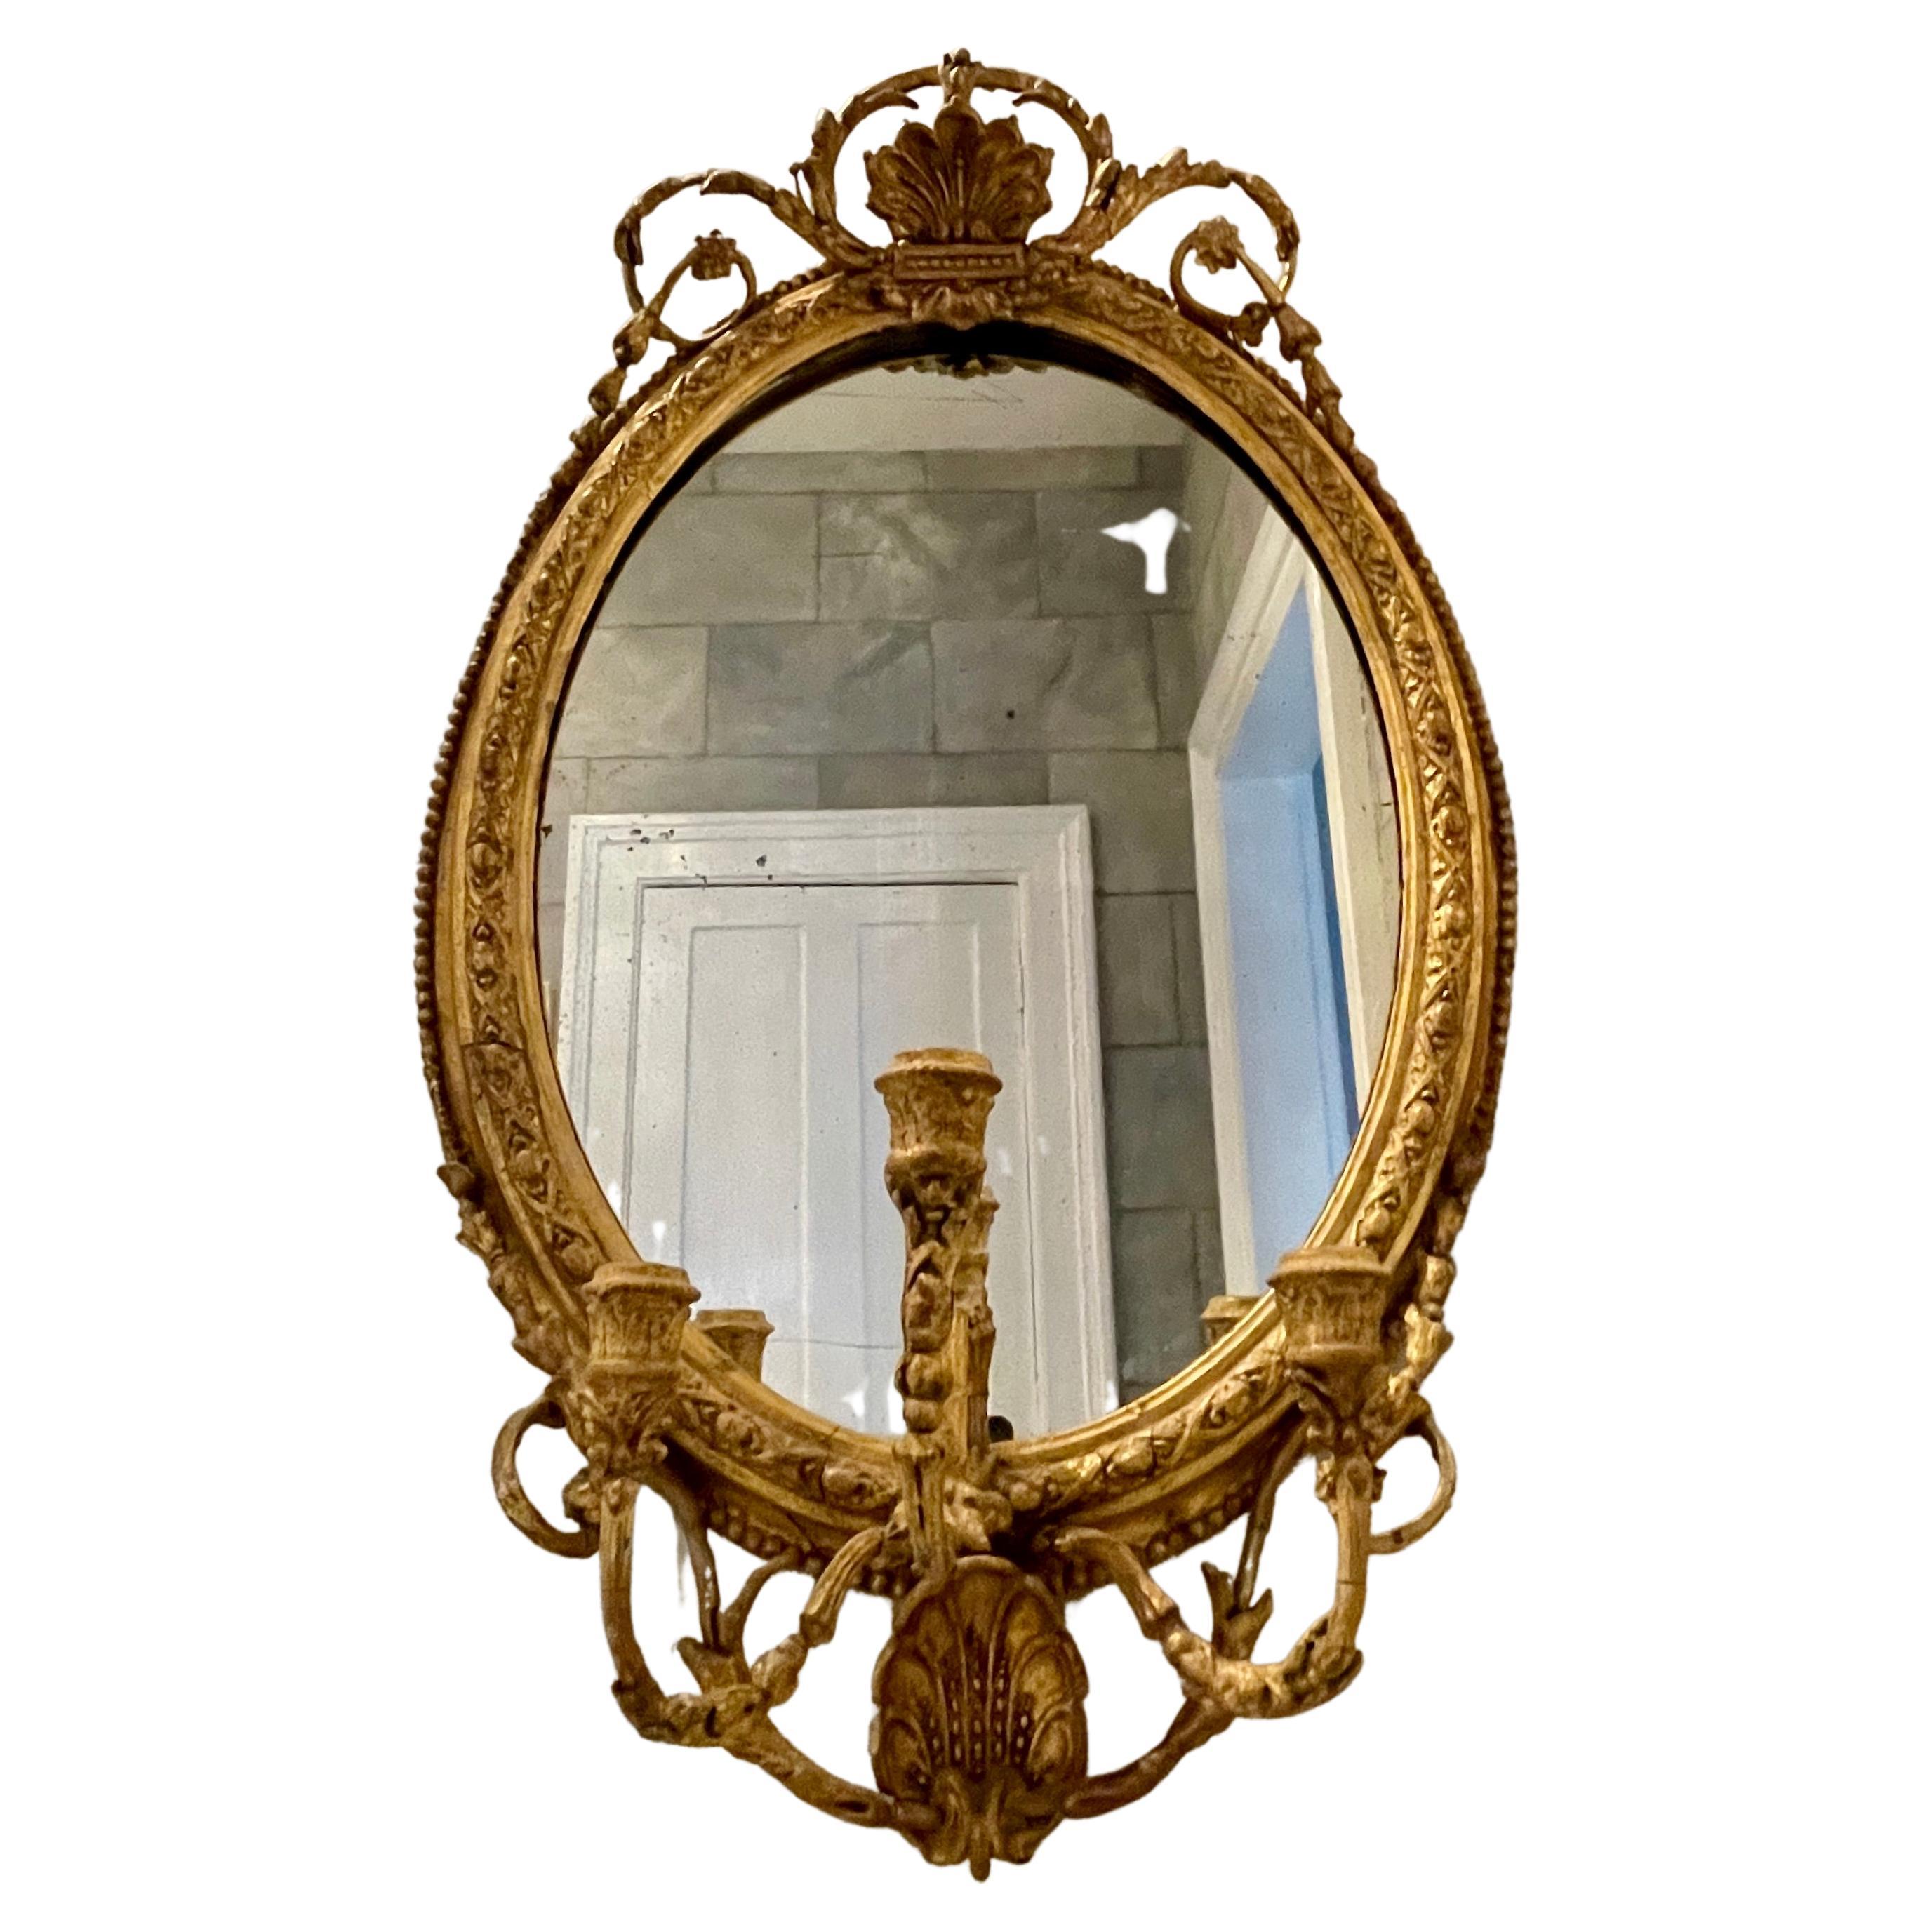 This delicate oval mirror is an outstanding example of fine English or German craftsmanship in the 18th Century. It features hand-carved wood and gesso gilding with triple candelabra, double shell decoration, beaded bellflower molding, and original